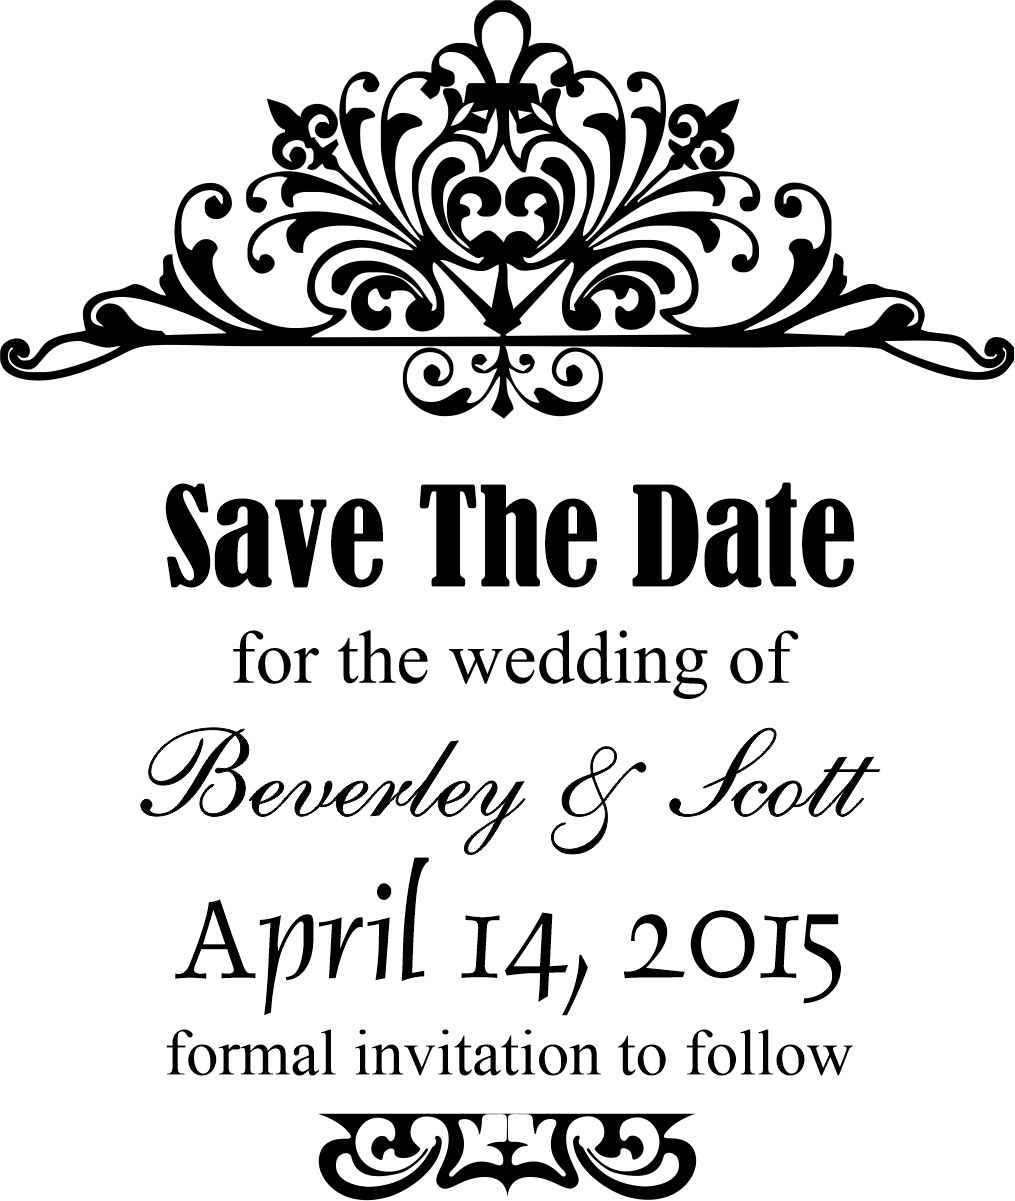 save the date stamp small - 4a